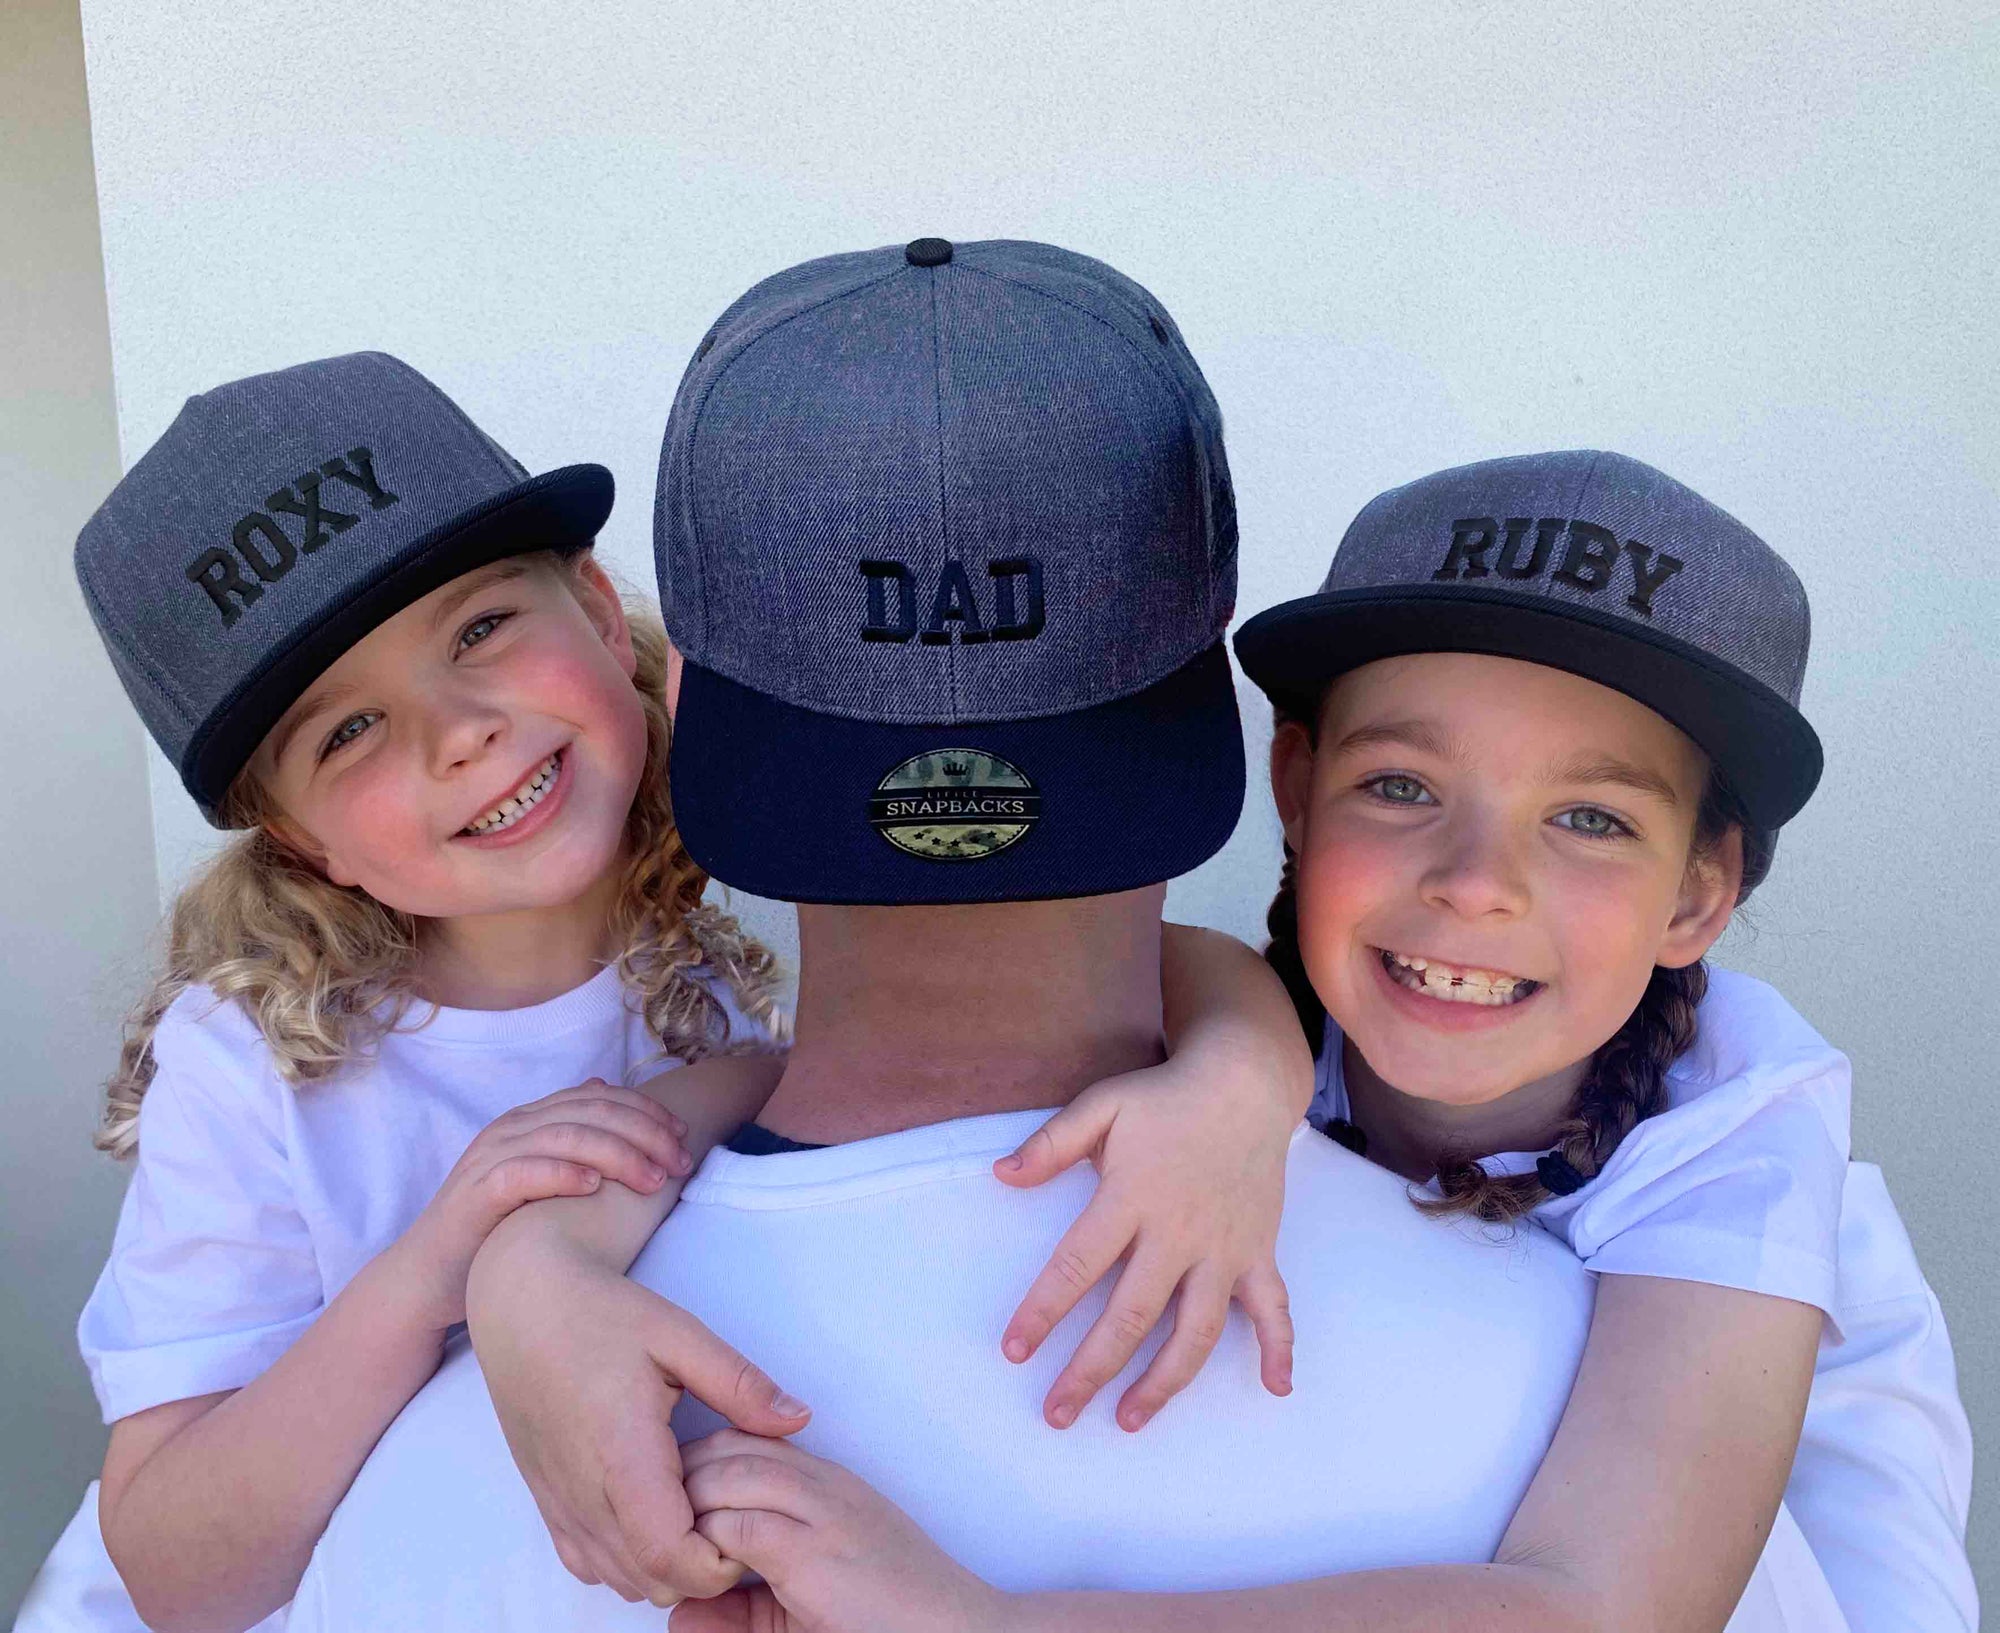 Matching Father's Day Range - Gift idea